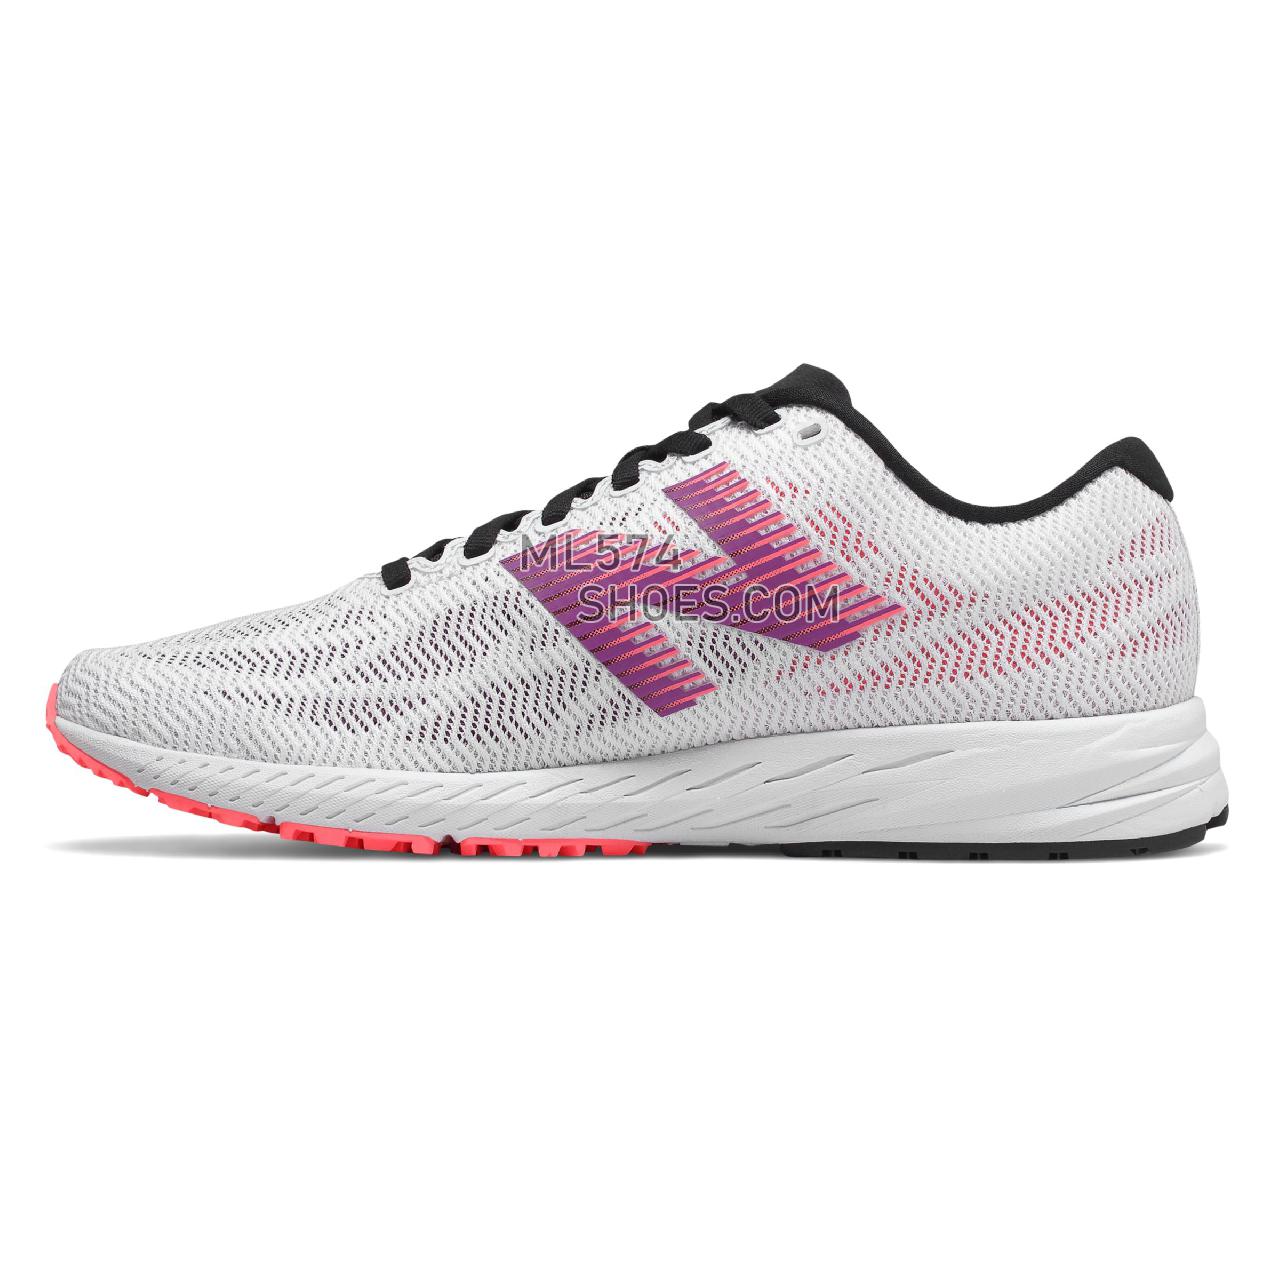 New Balance 1400v6 - Women's 1400v6 Running - White with Voltage Violet and Guava - W1400WB6